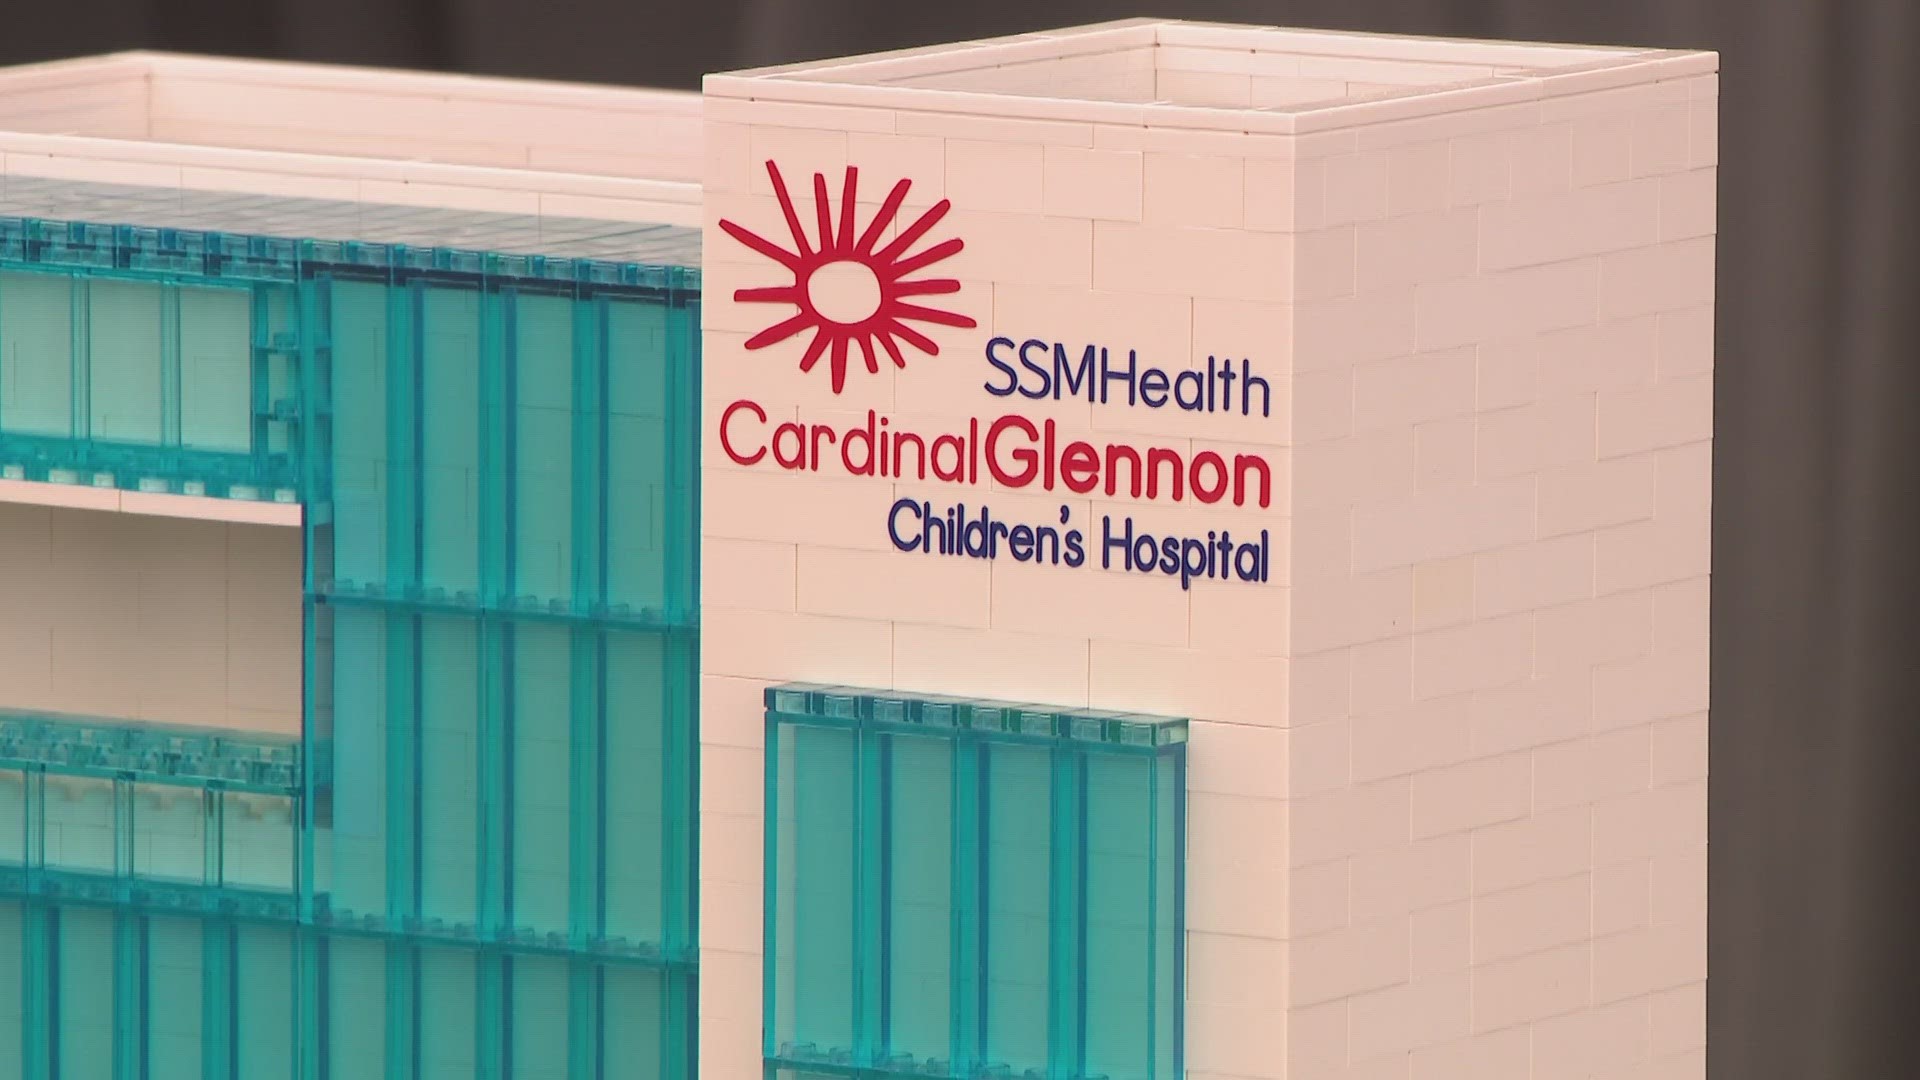 World-class pediatric health care in St. Louis is getting a boost. The plans are for a 14-story facility with more than 200 inpatient beds.